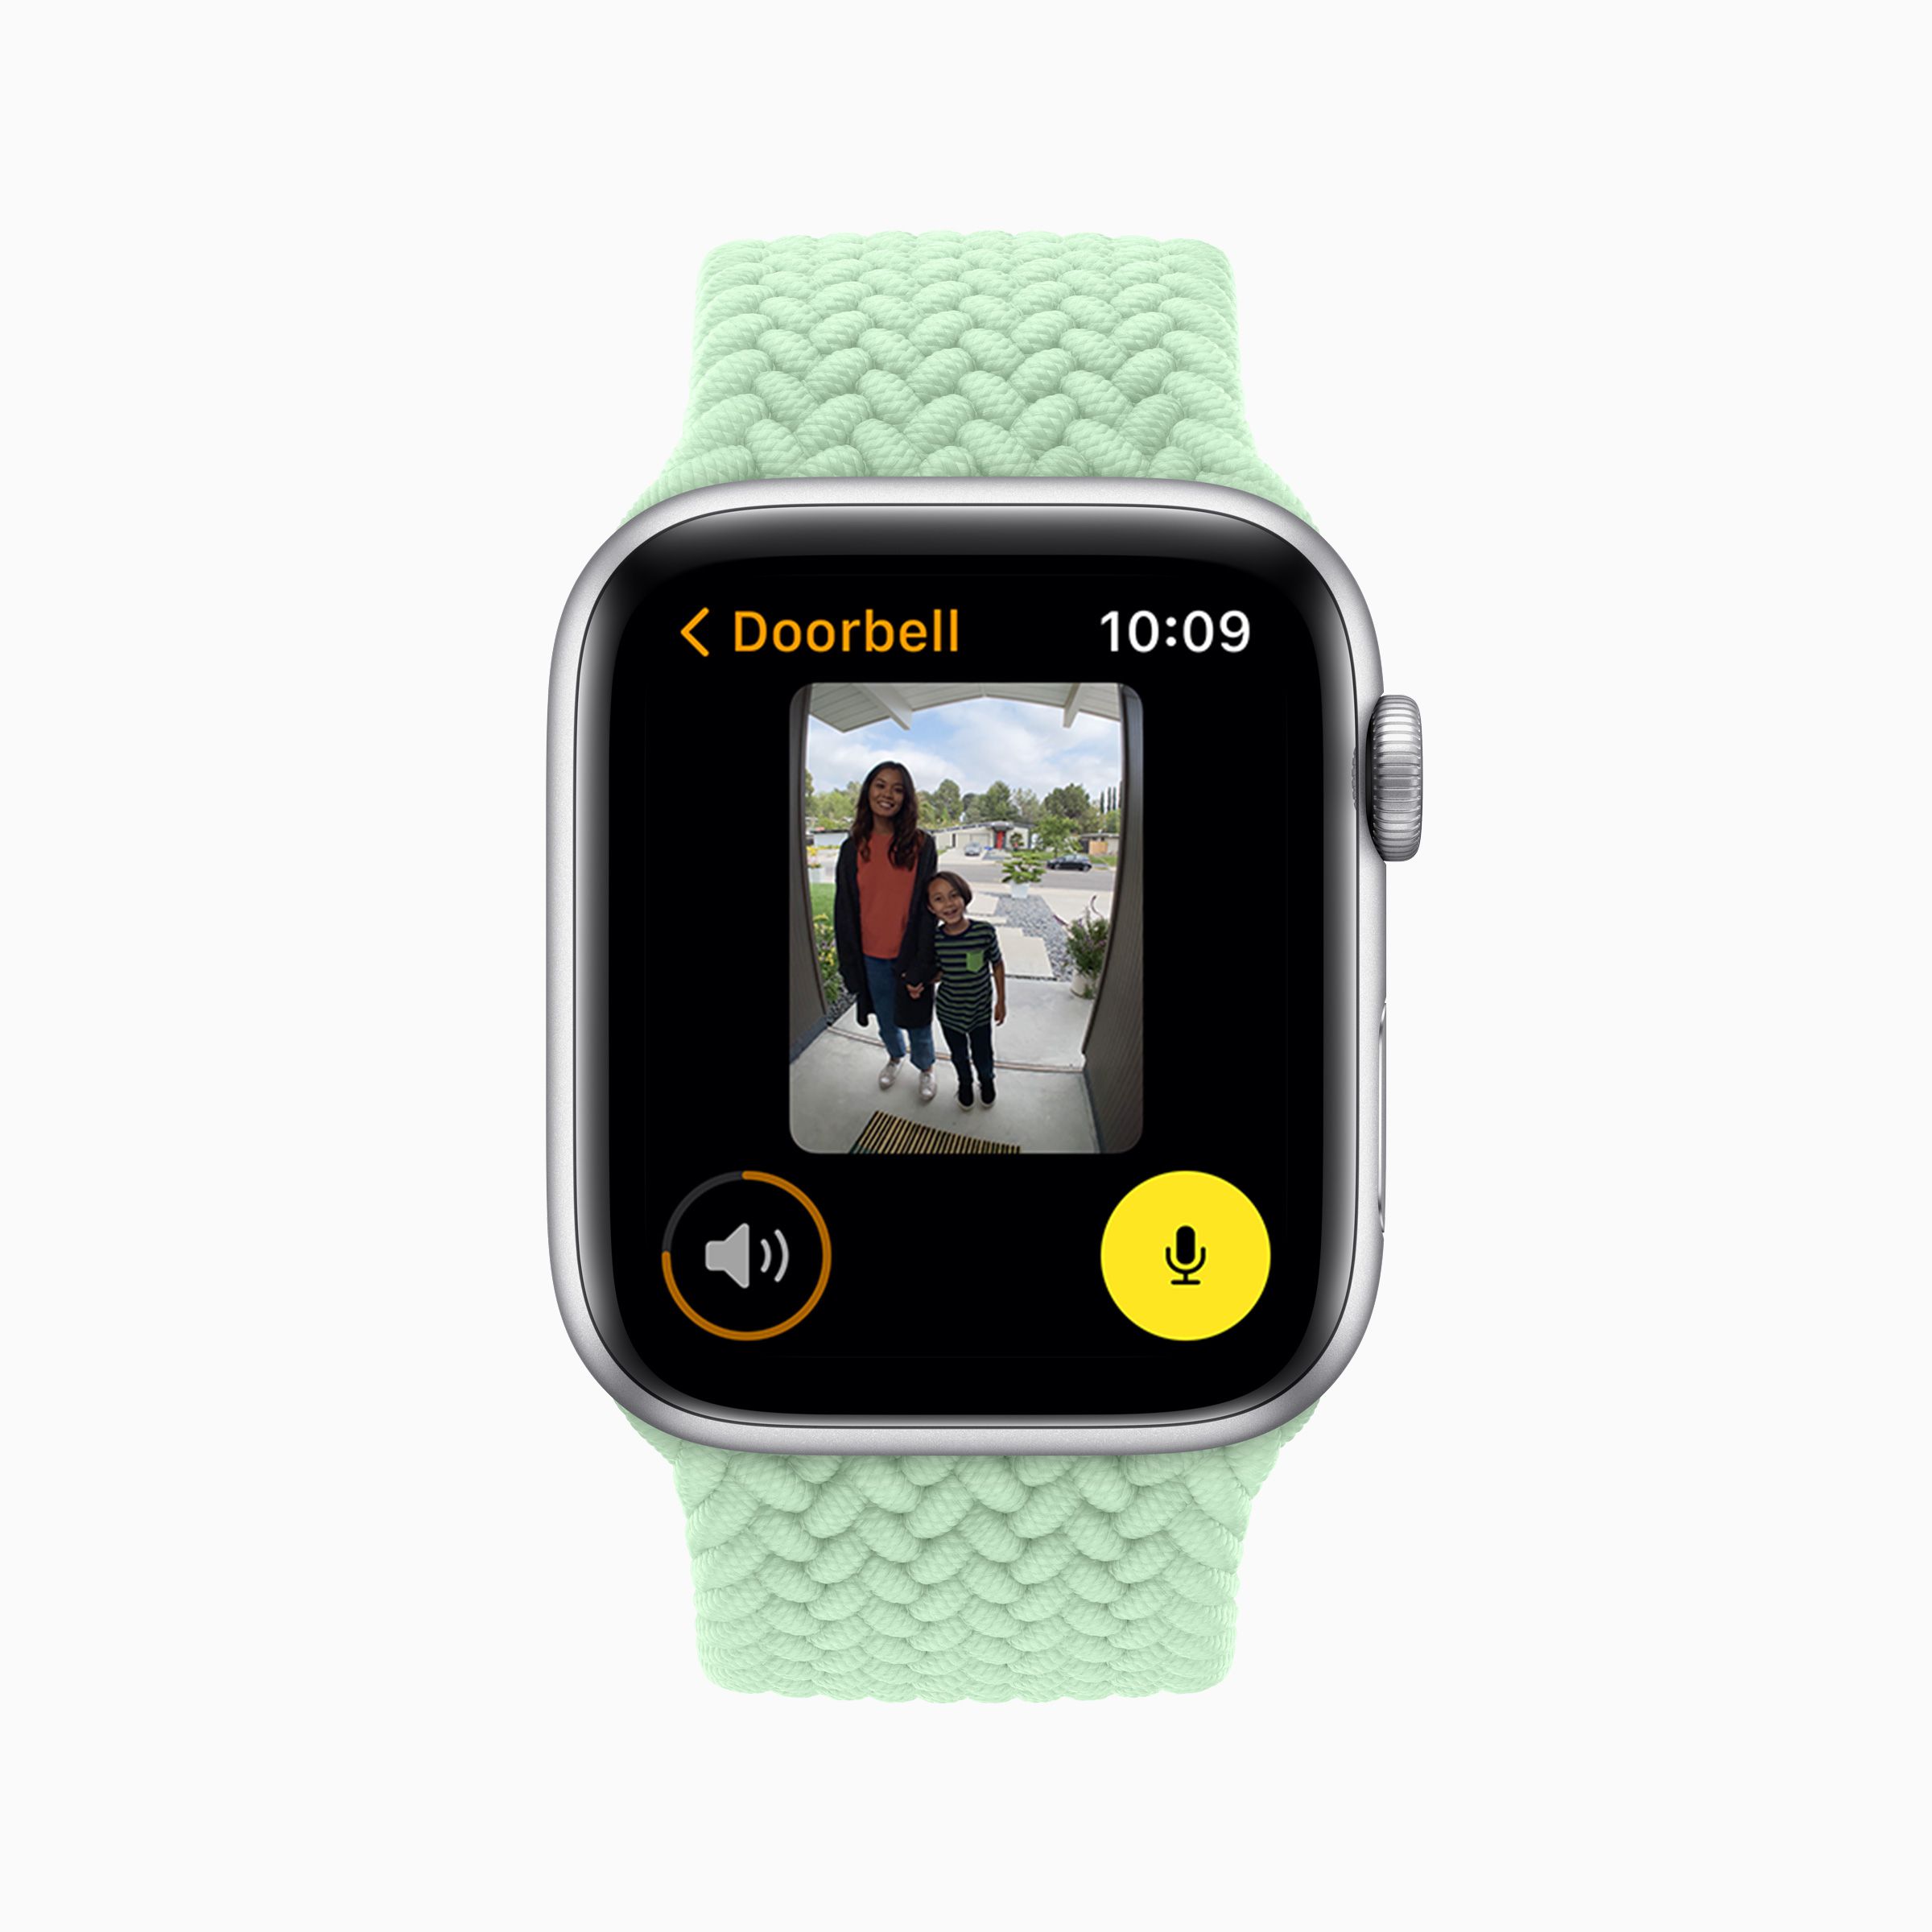 A new software update for Apple Watch lets you view your HomeKit doorbell camera feed on your watch screen.